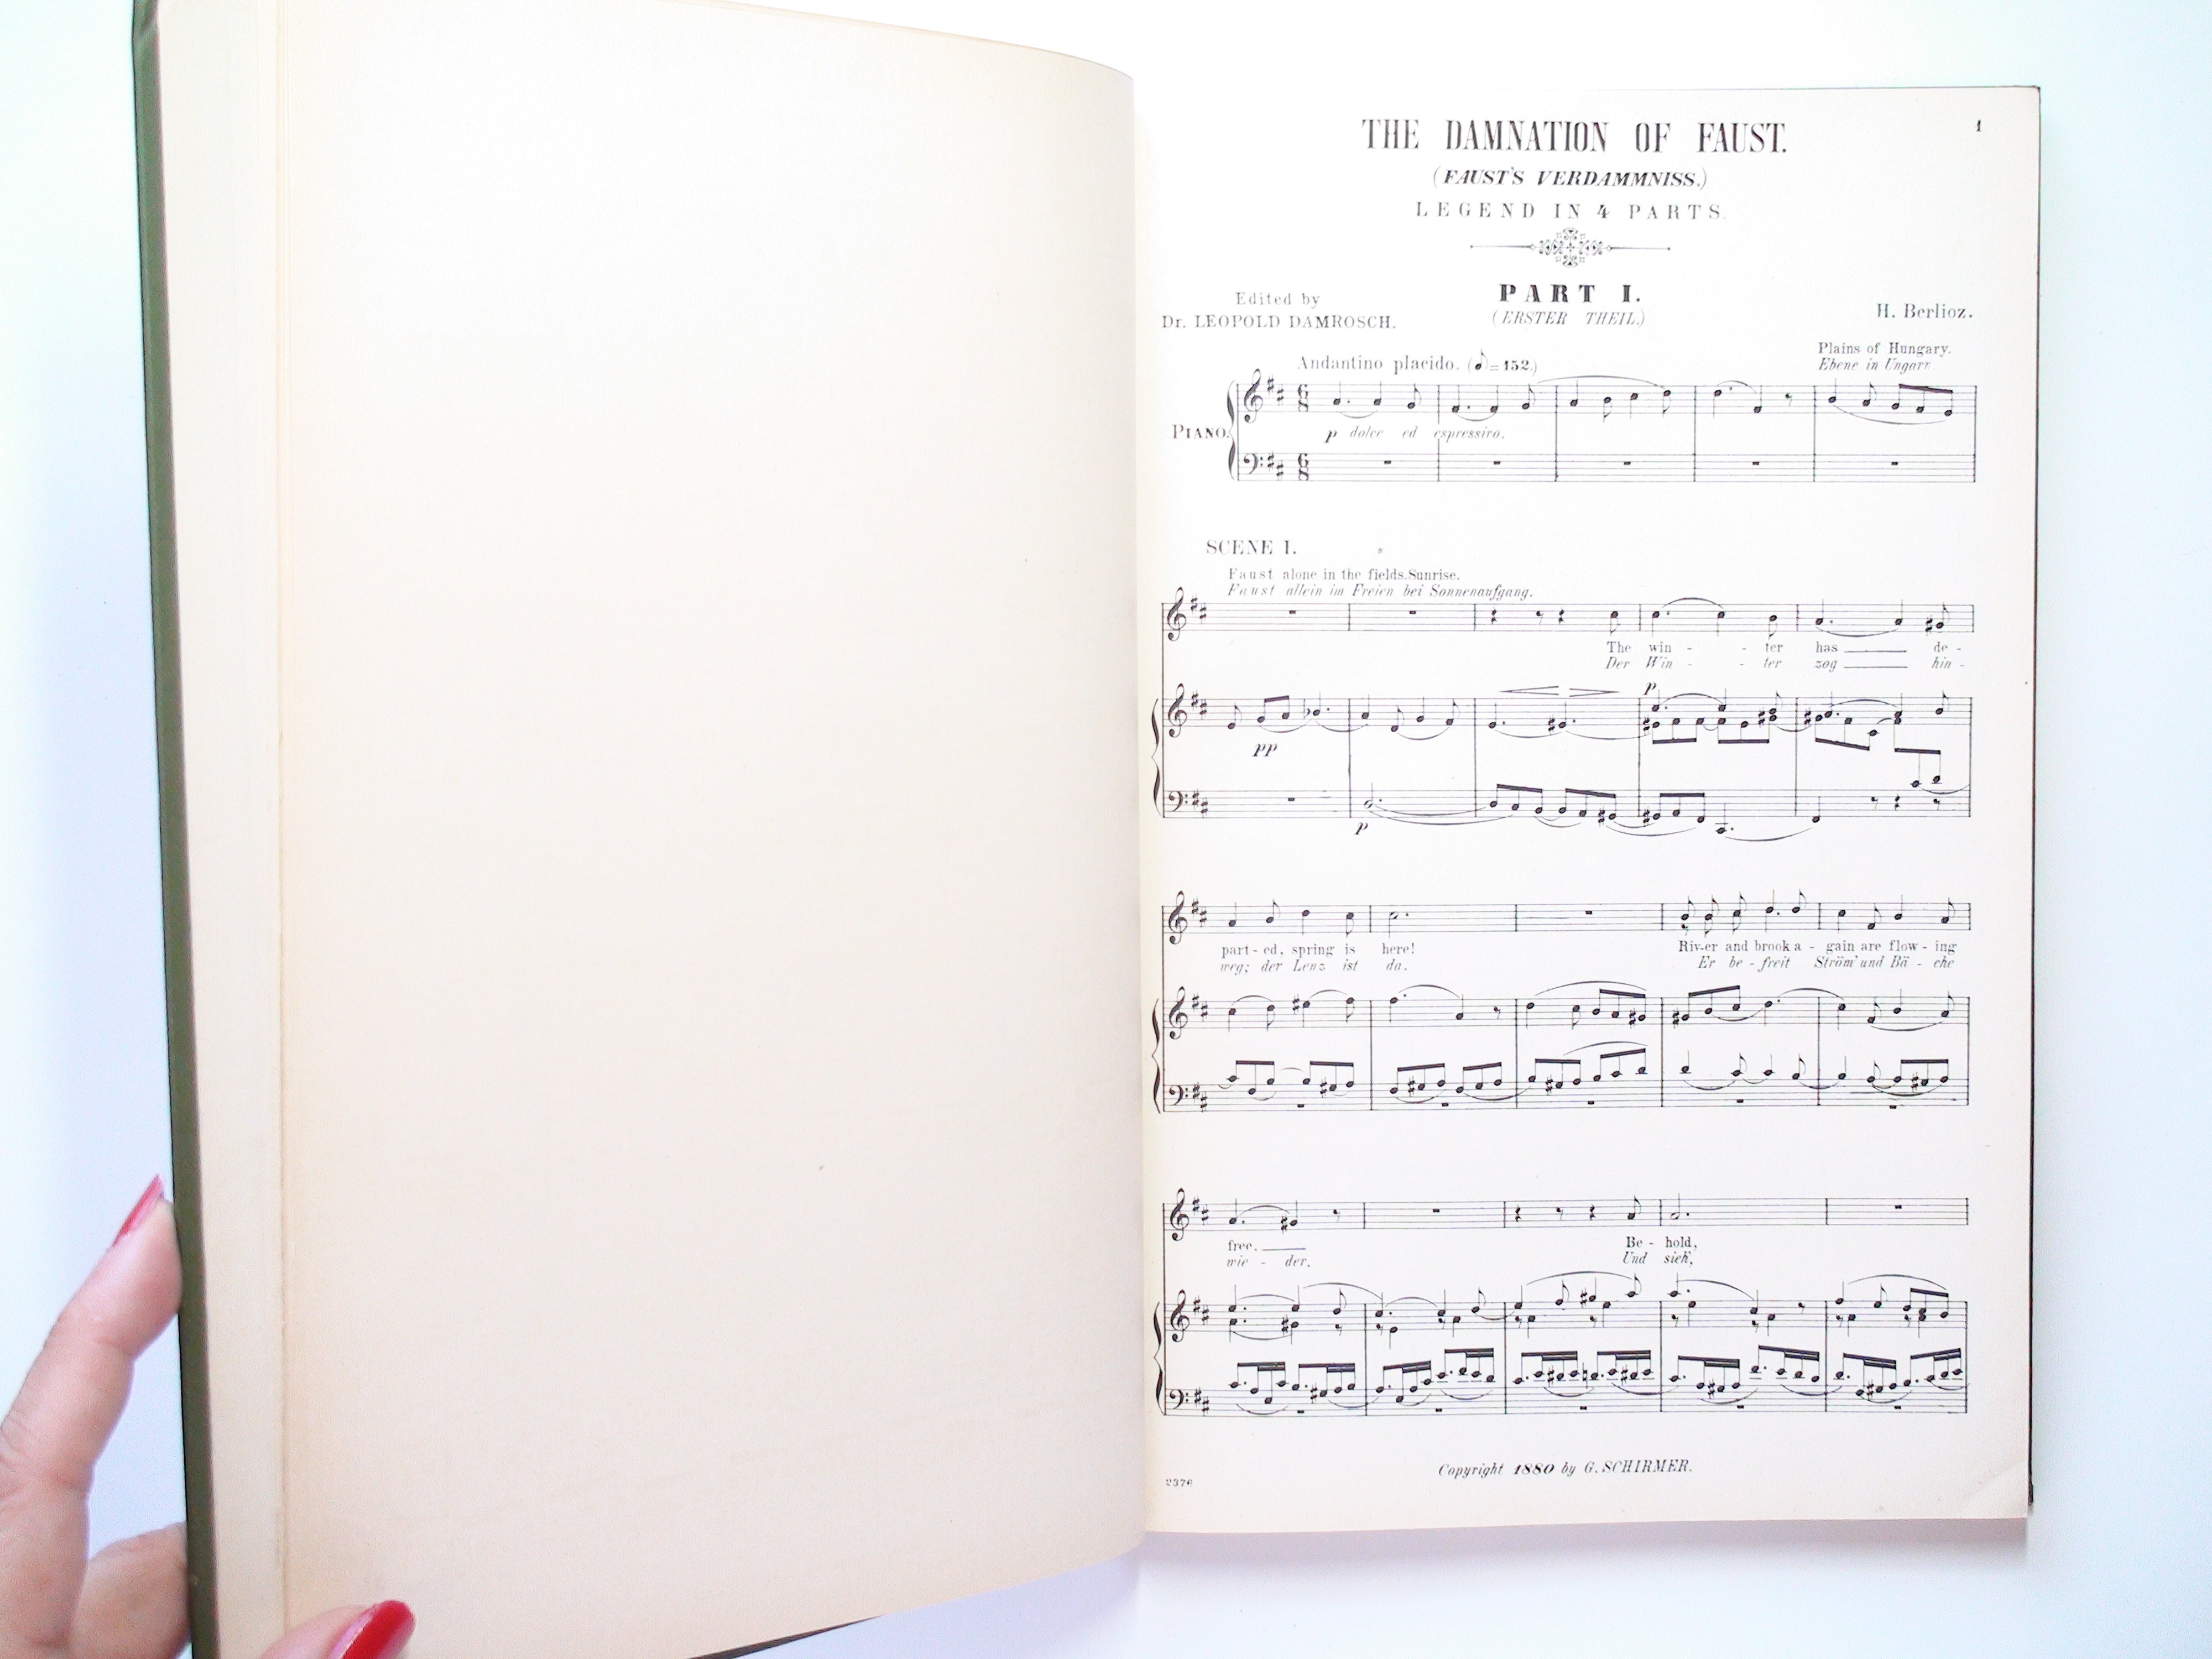 The Damnation of Faust, Music by Hector Berlioz, Vocal Score, G. Schirmer, c1880